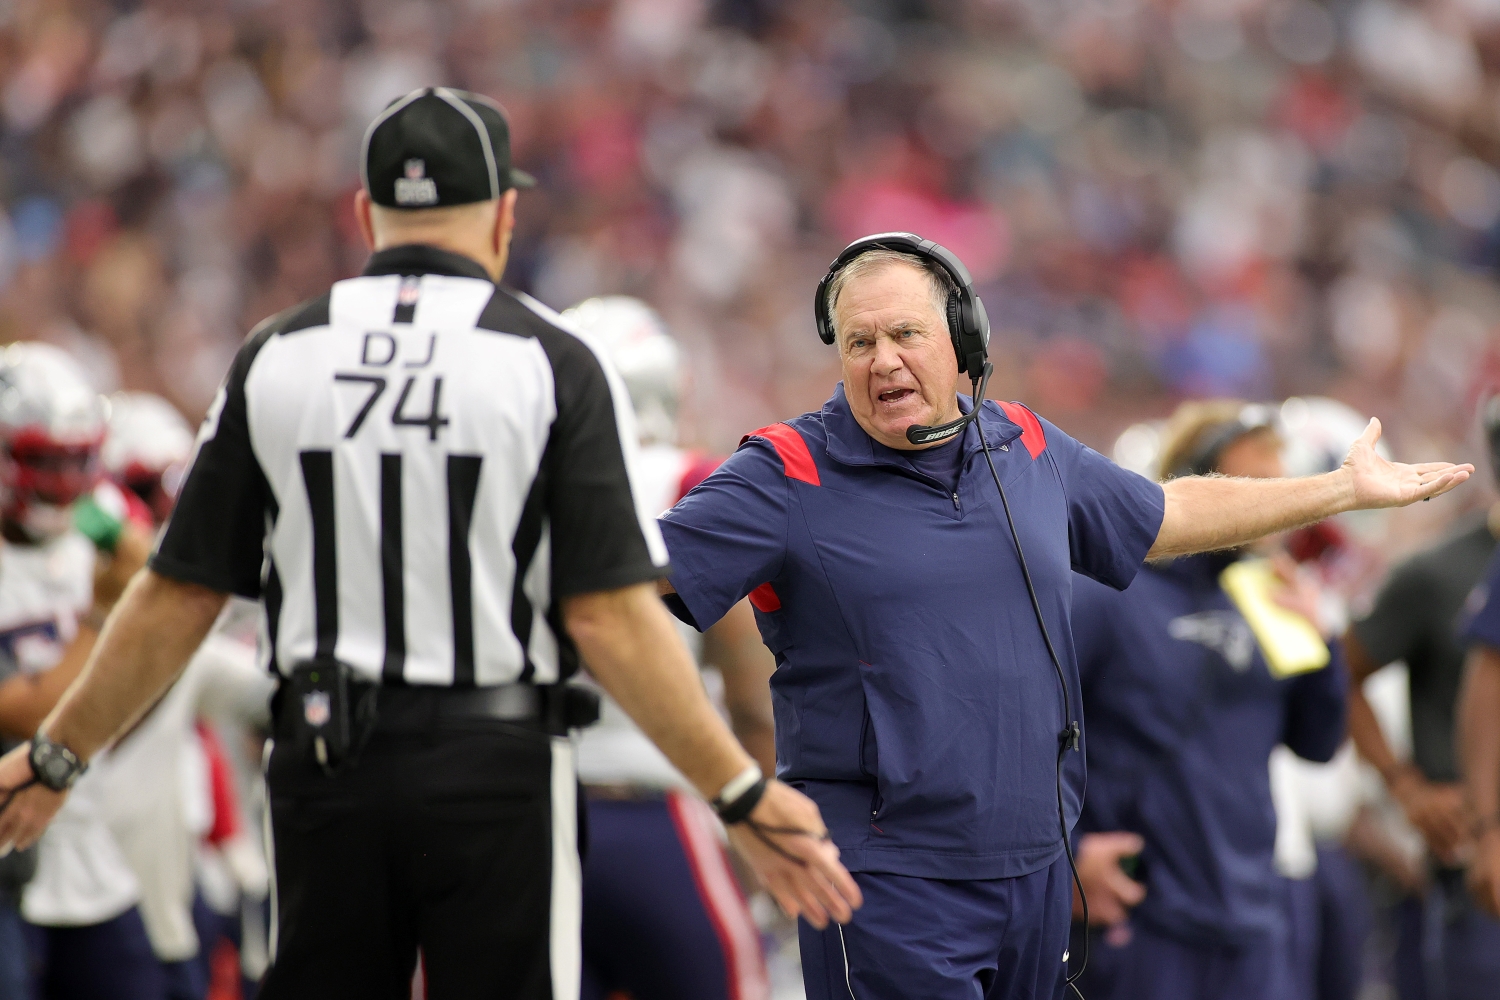 New England Patriots head coach Bill Belichick reacts to a call during a game.